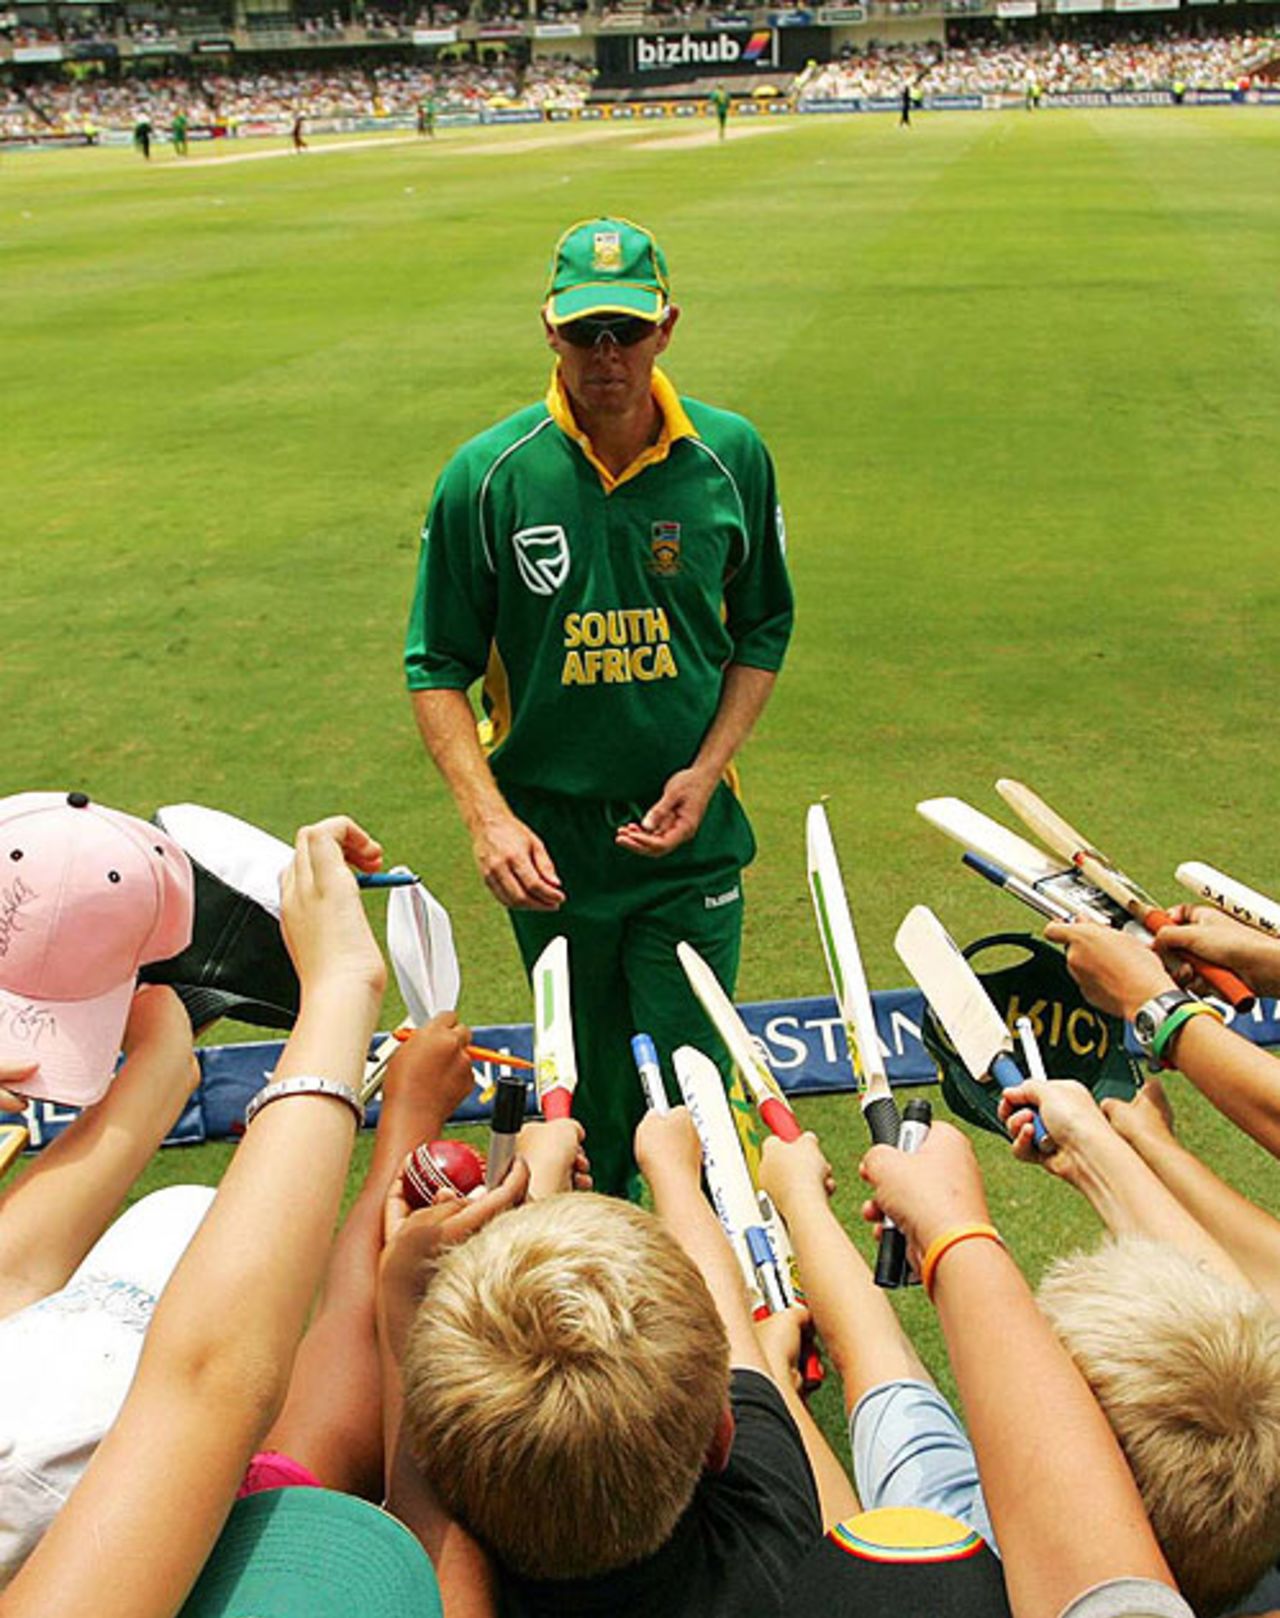 Shaun Pollock signs autographs during his final international appearance, South Africa v West Indies, 5th ODI, Johannesburg, February 3, 2008